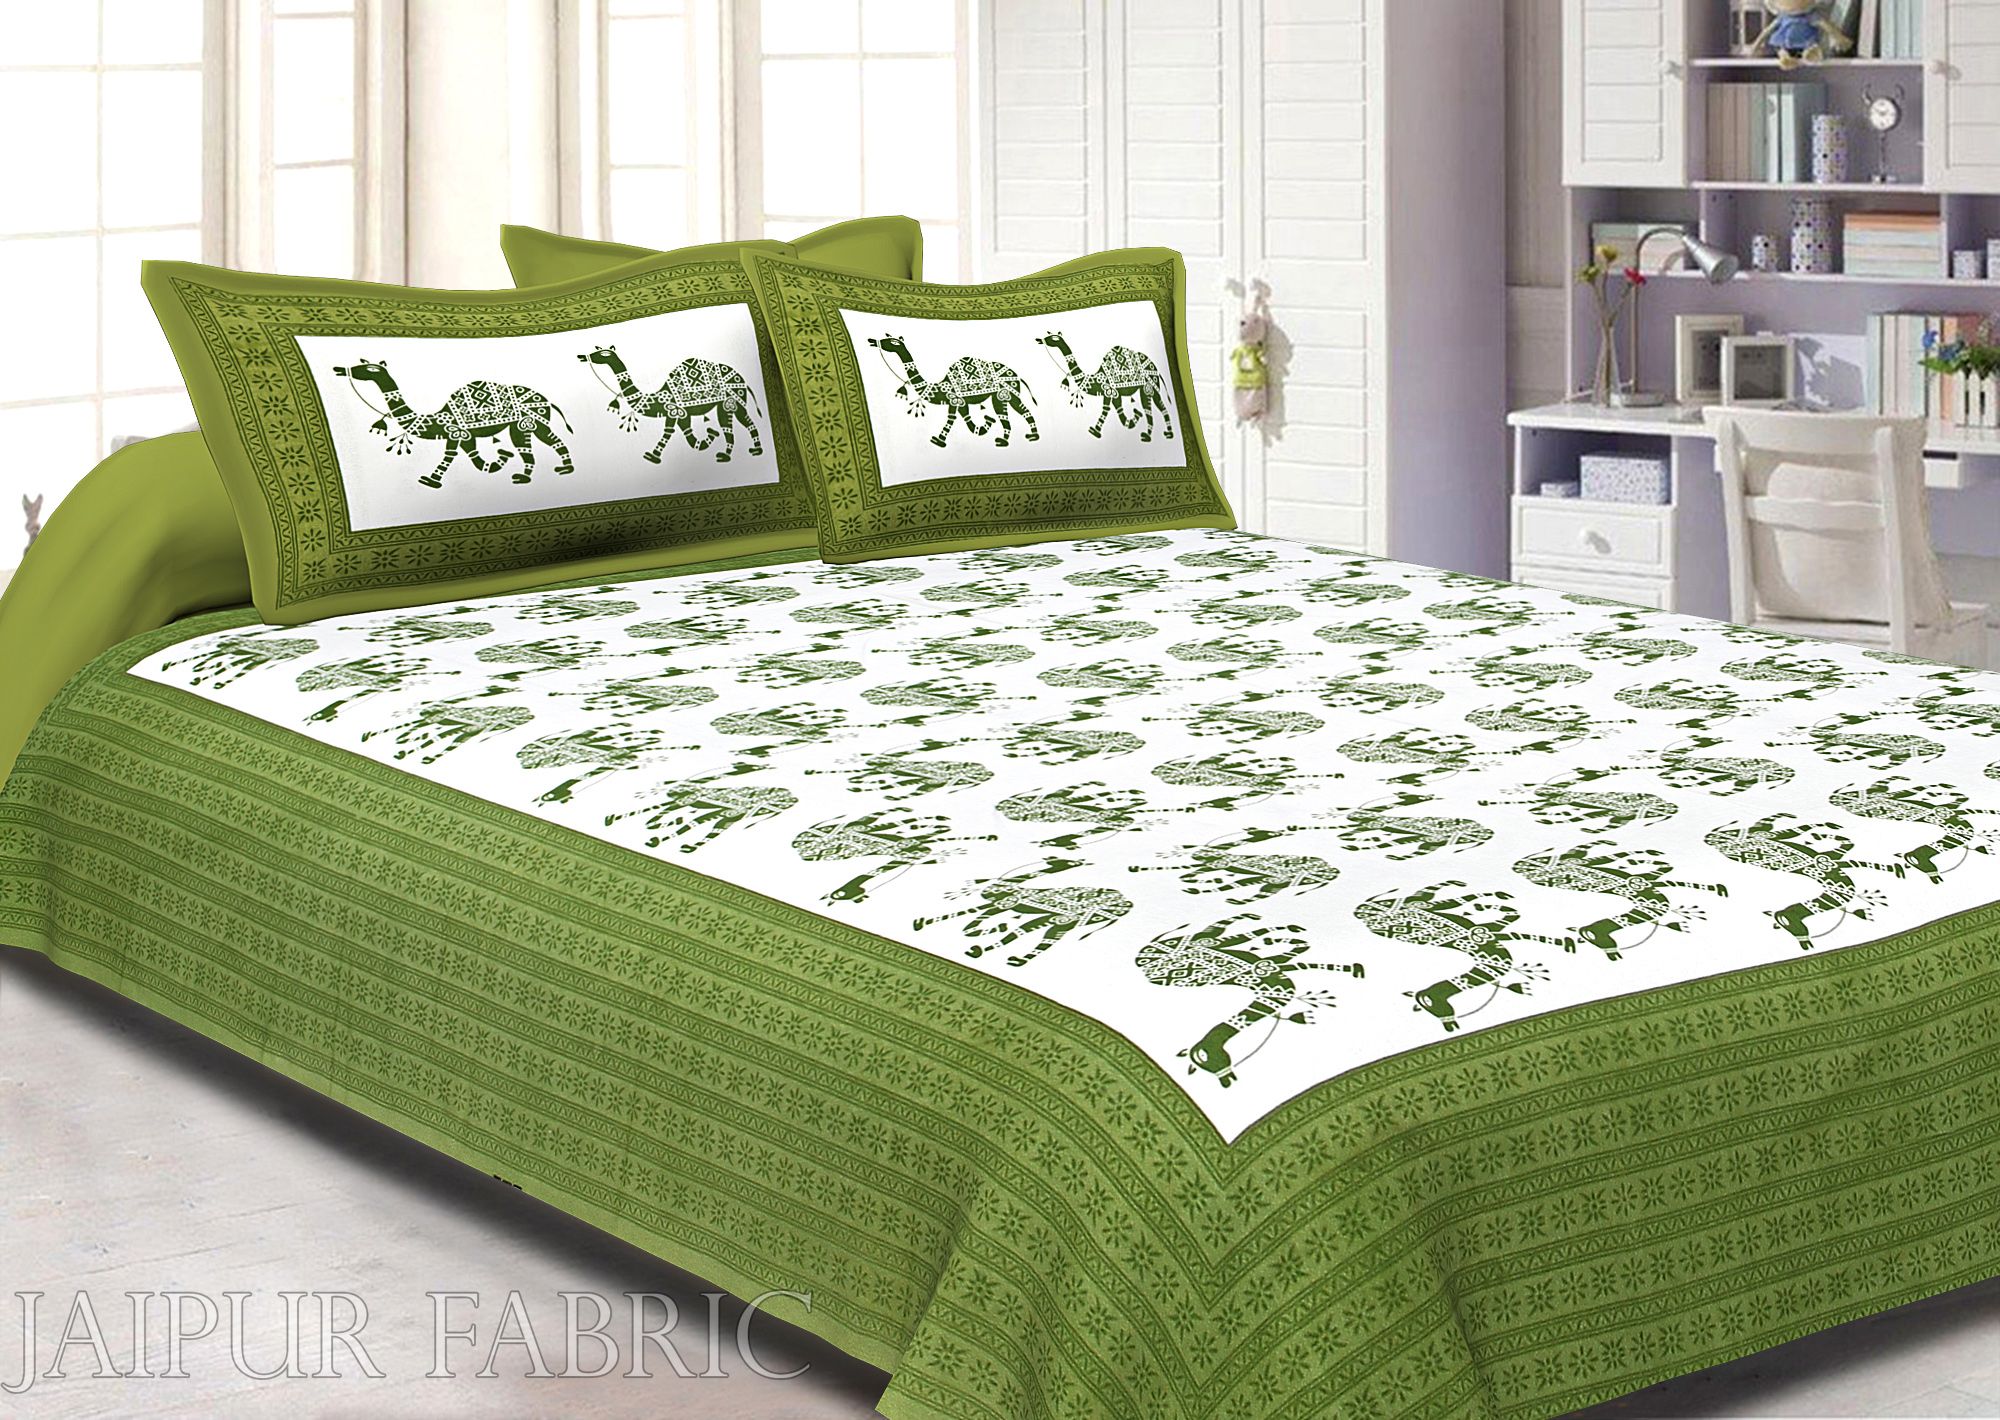 Green Camel Print Cotton Double Bed Sheet